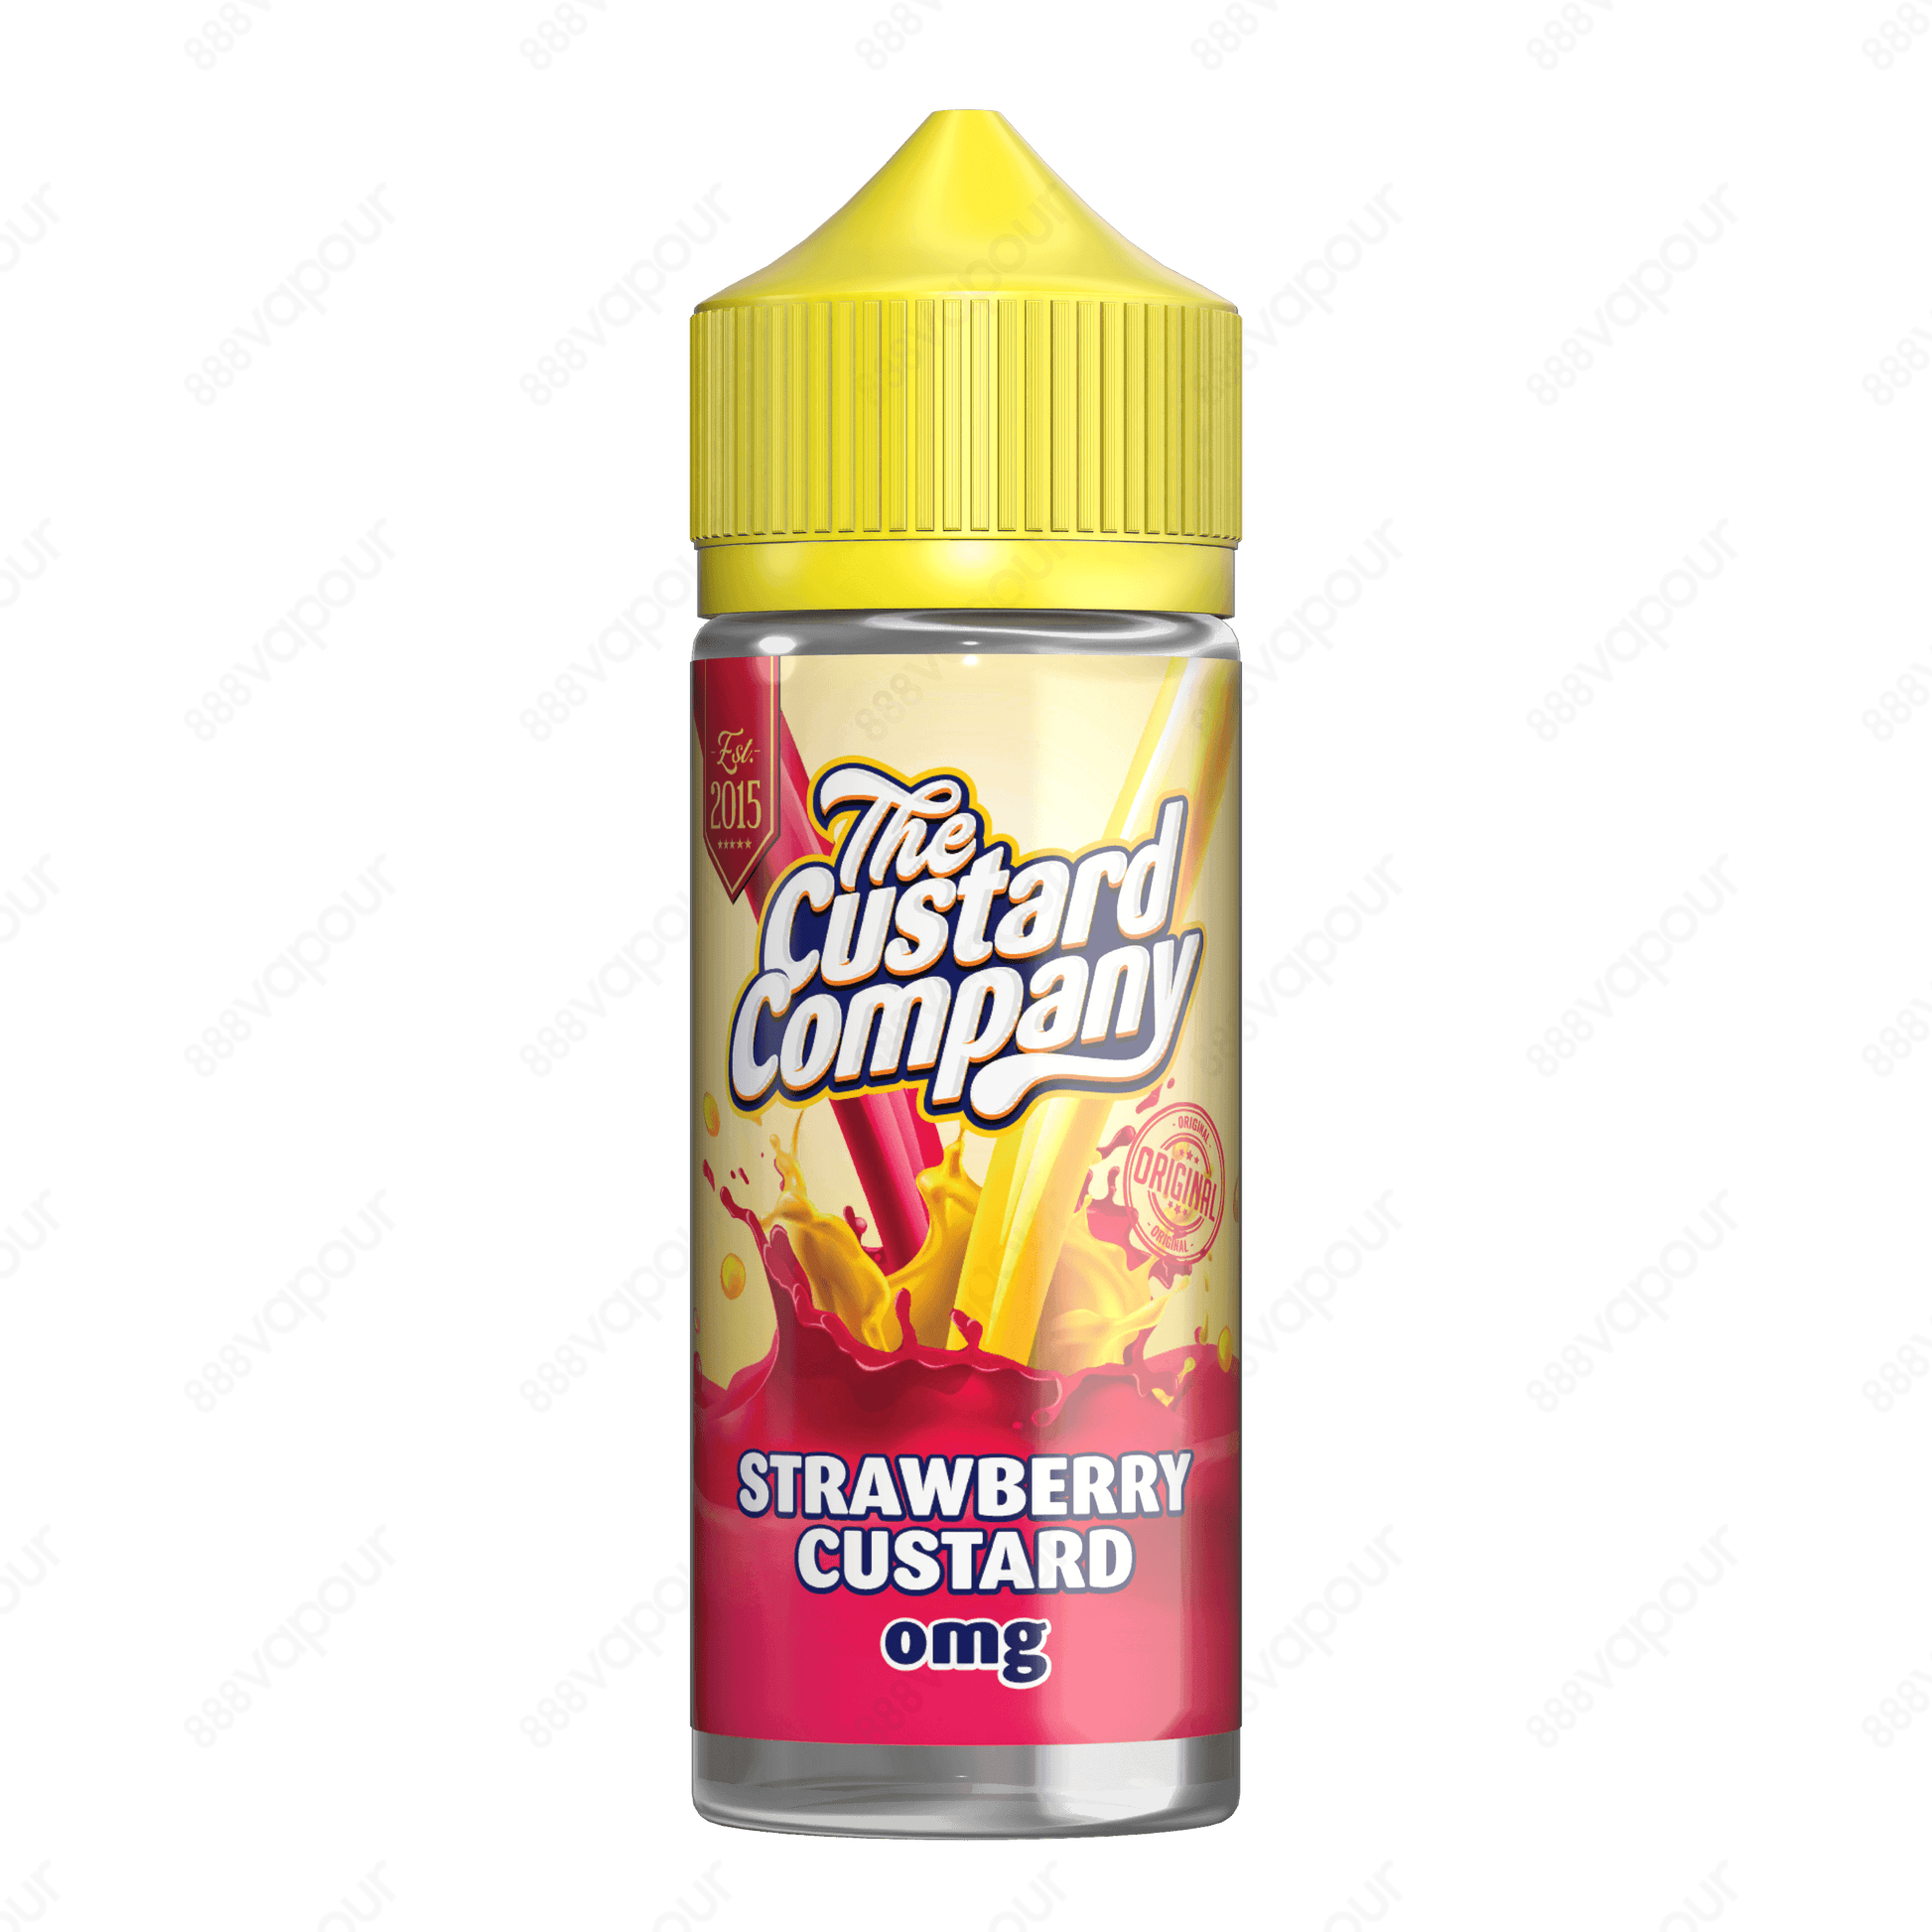 The Custard Company Strawberry Custard E-Liquid | £10.00 | 888 Vapour | The Custard Company Strawberry Custard e-liquid is a deep, rich, creamy custard infused with sweet and ripe strawberries. A strawberry dessert e-liquid to really whet the appetite! St